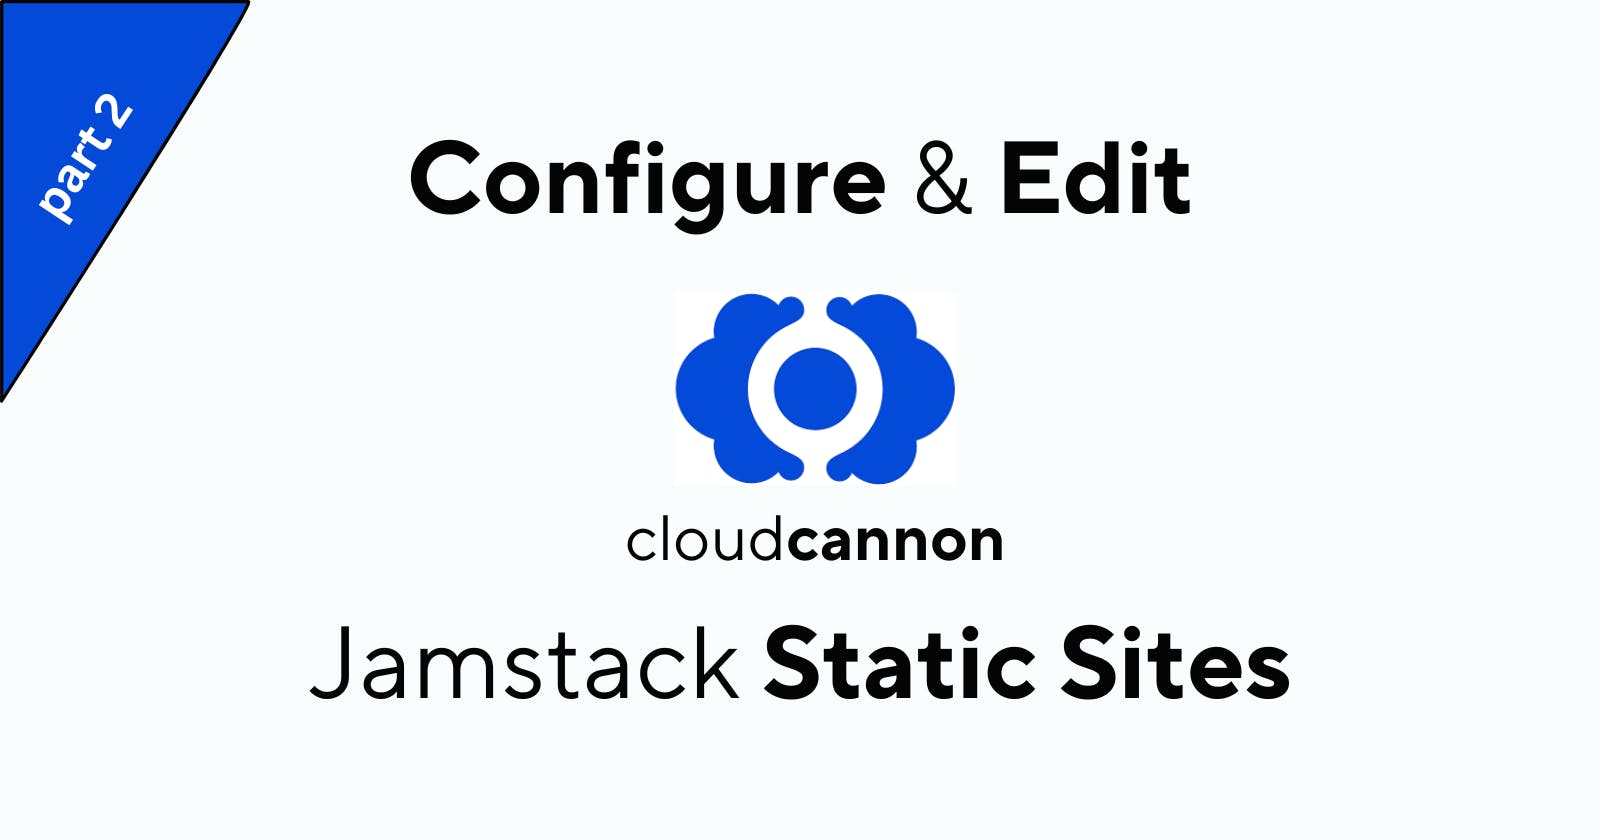 How to Configure cloudcannon collections to enable Post & Page content editing?